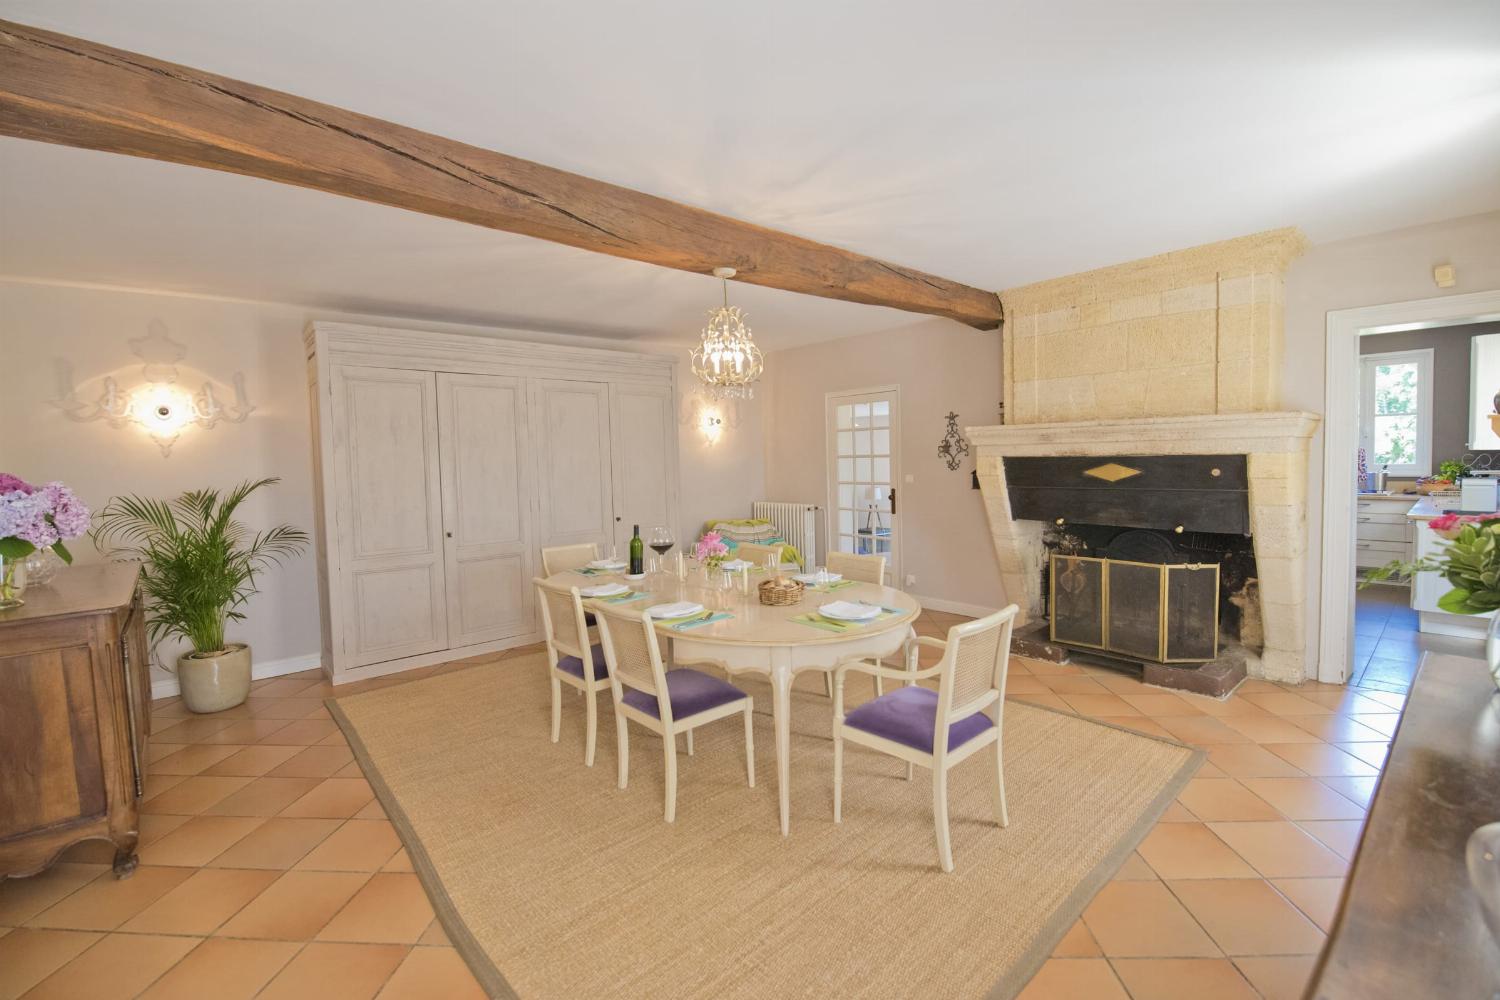 Dining room | Self-catering accommodation in Gironde